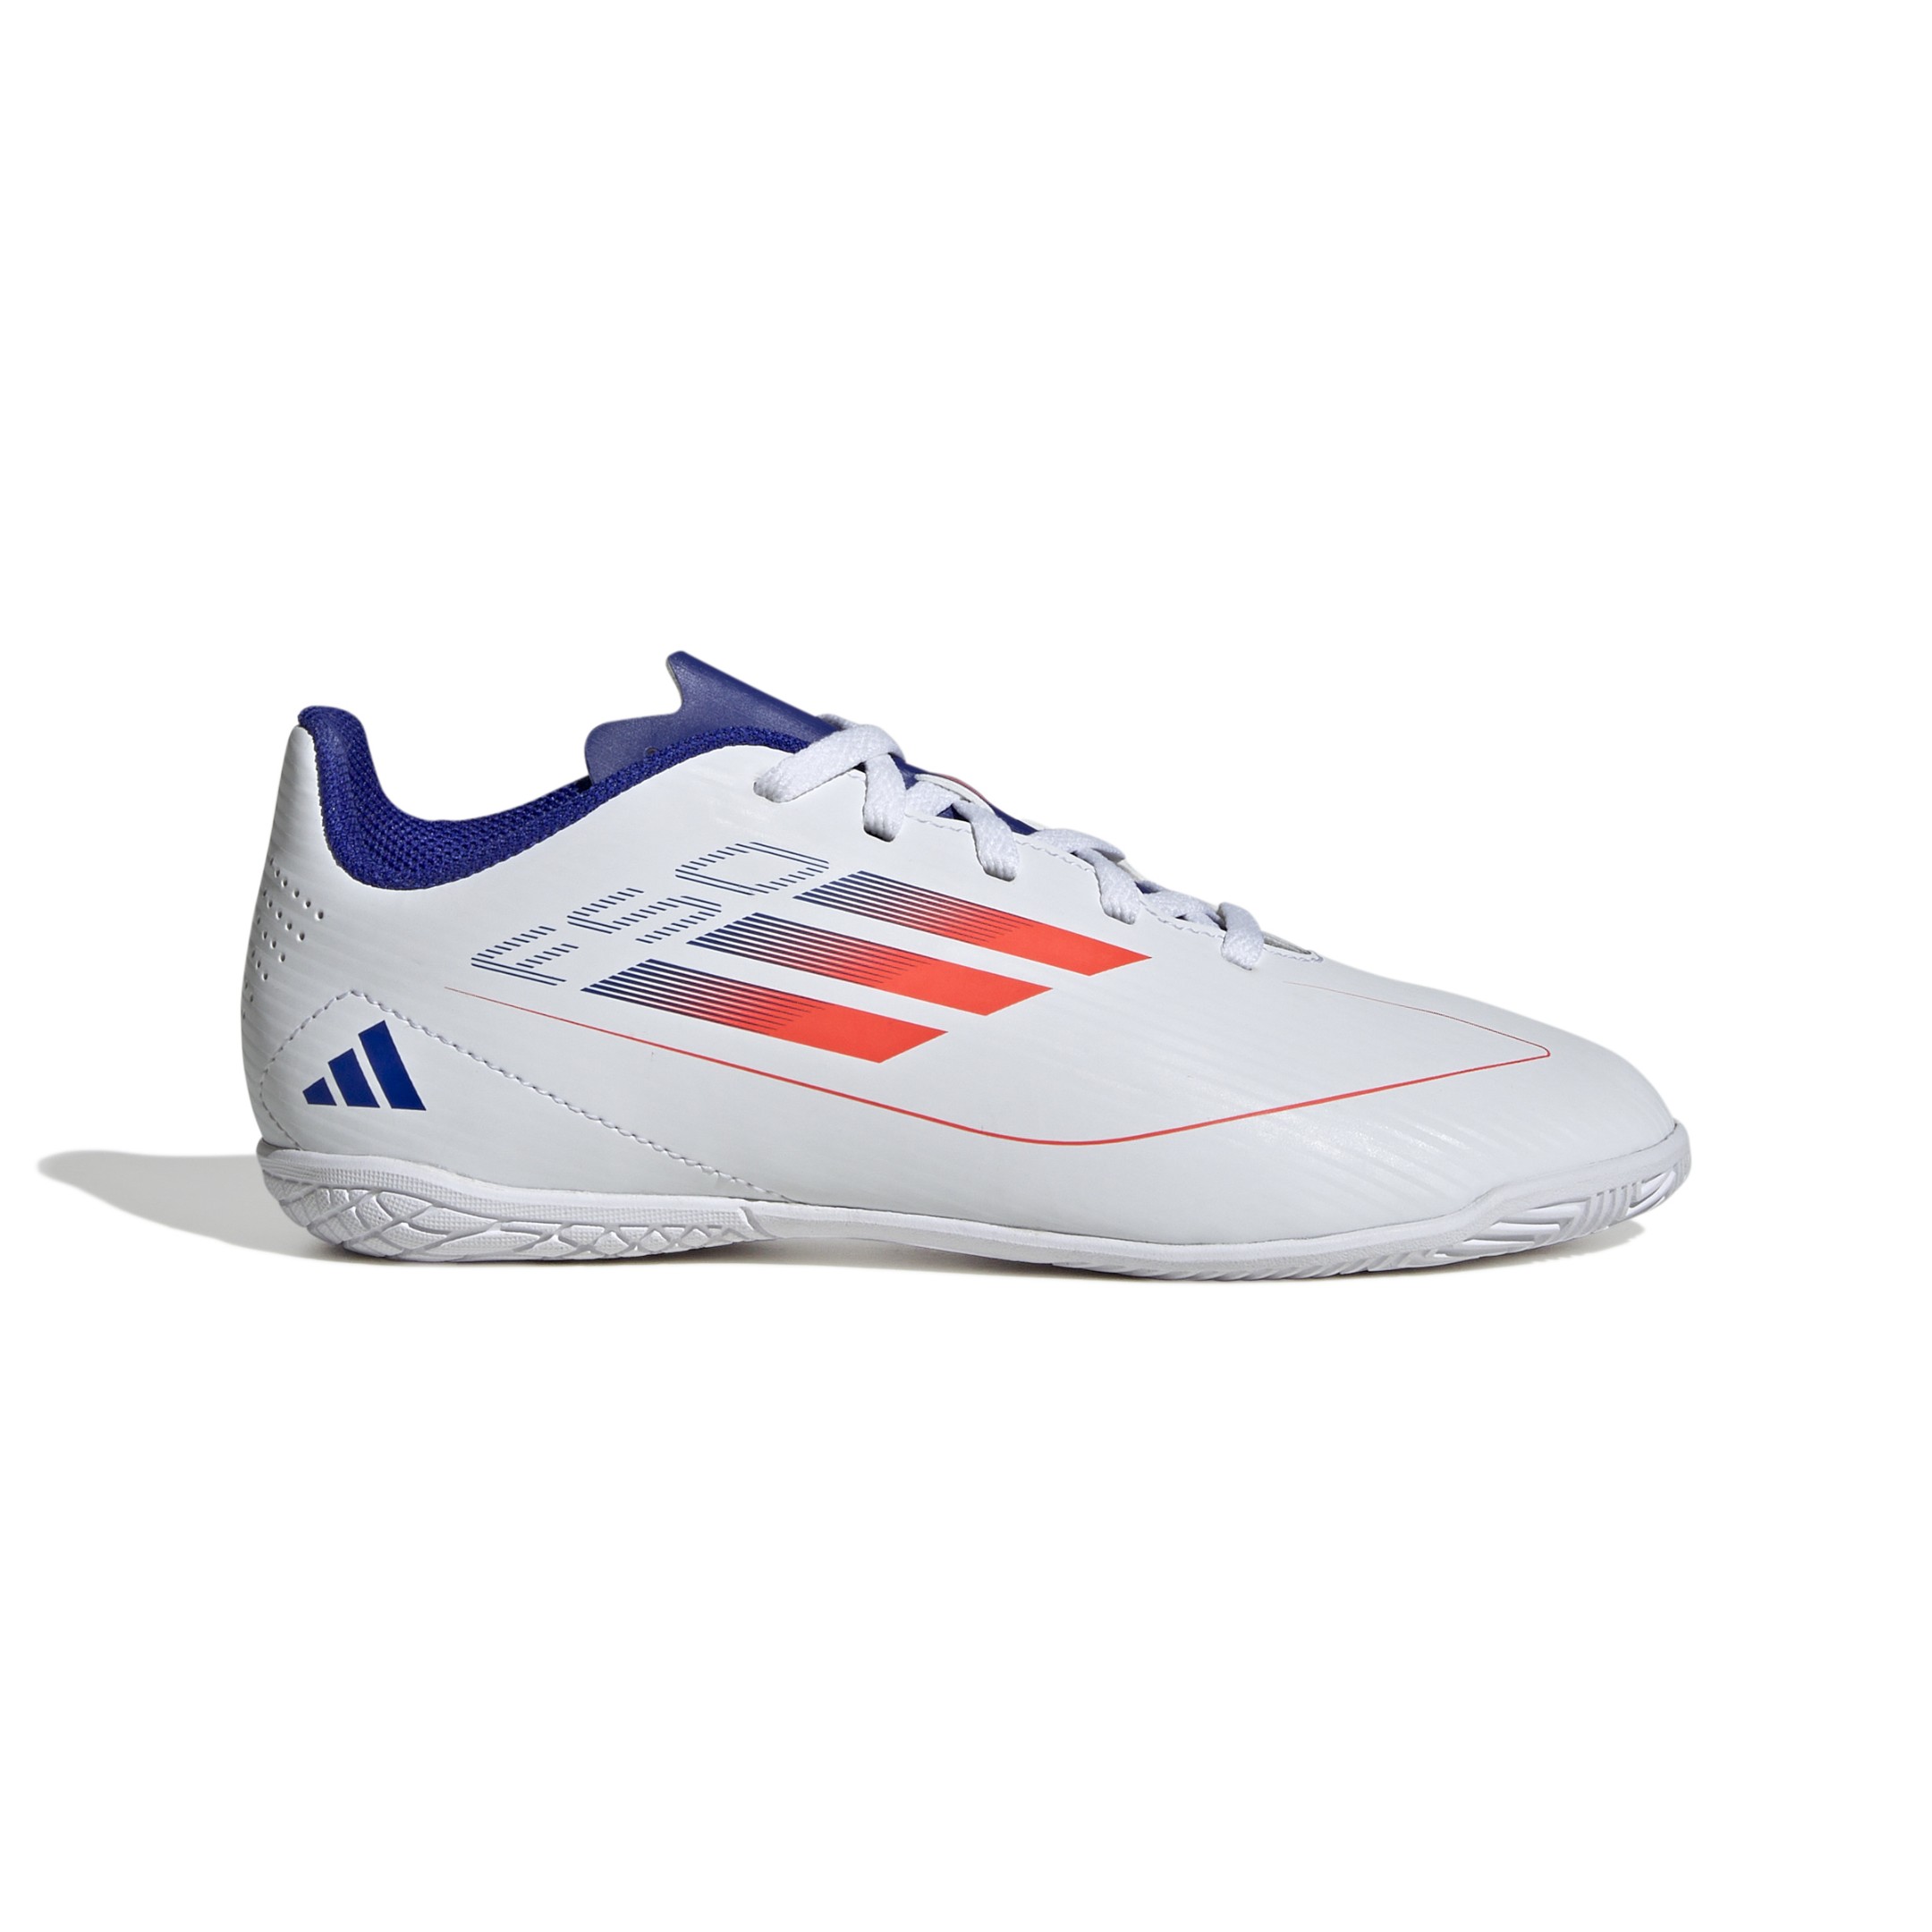 DEPORTIVO F50 CLUB IN J CLOUD WHITE / SOLAR RED / LUCID BLUE